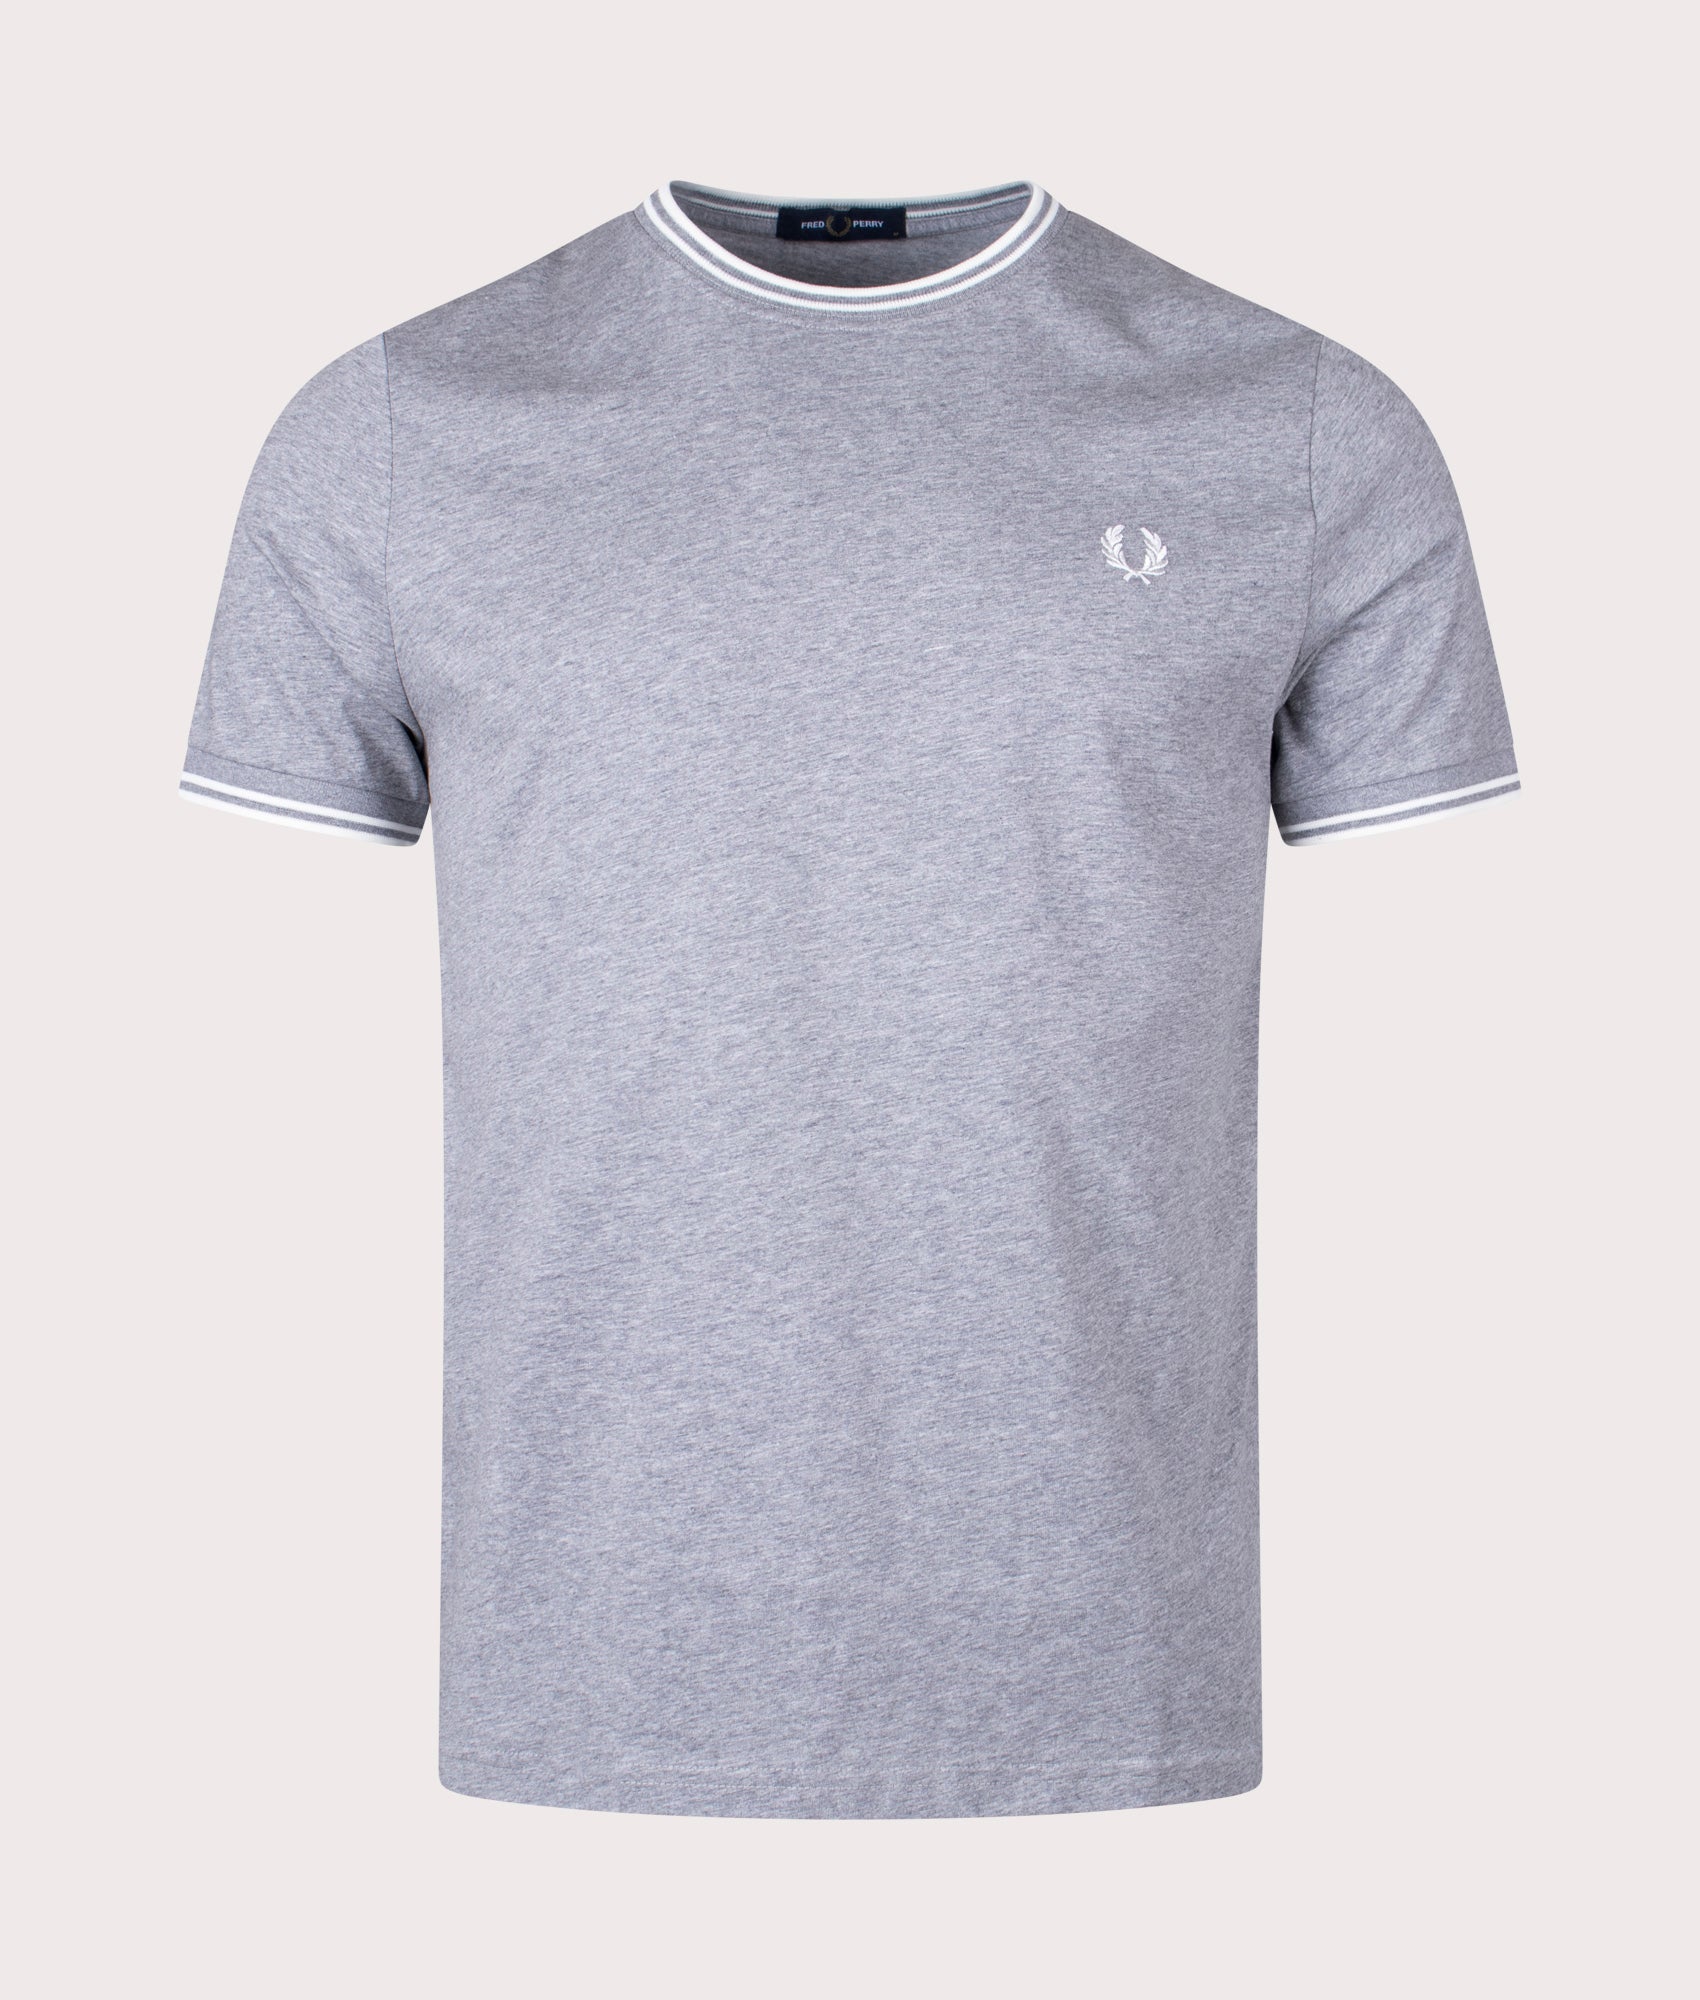 Fred Perry Mens Twin Tipped T-Shirt - Colour: 420 Steel Marl - Size: XXL